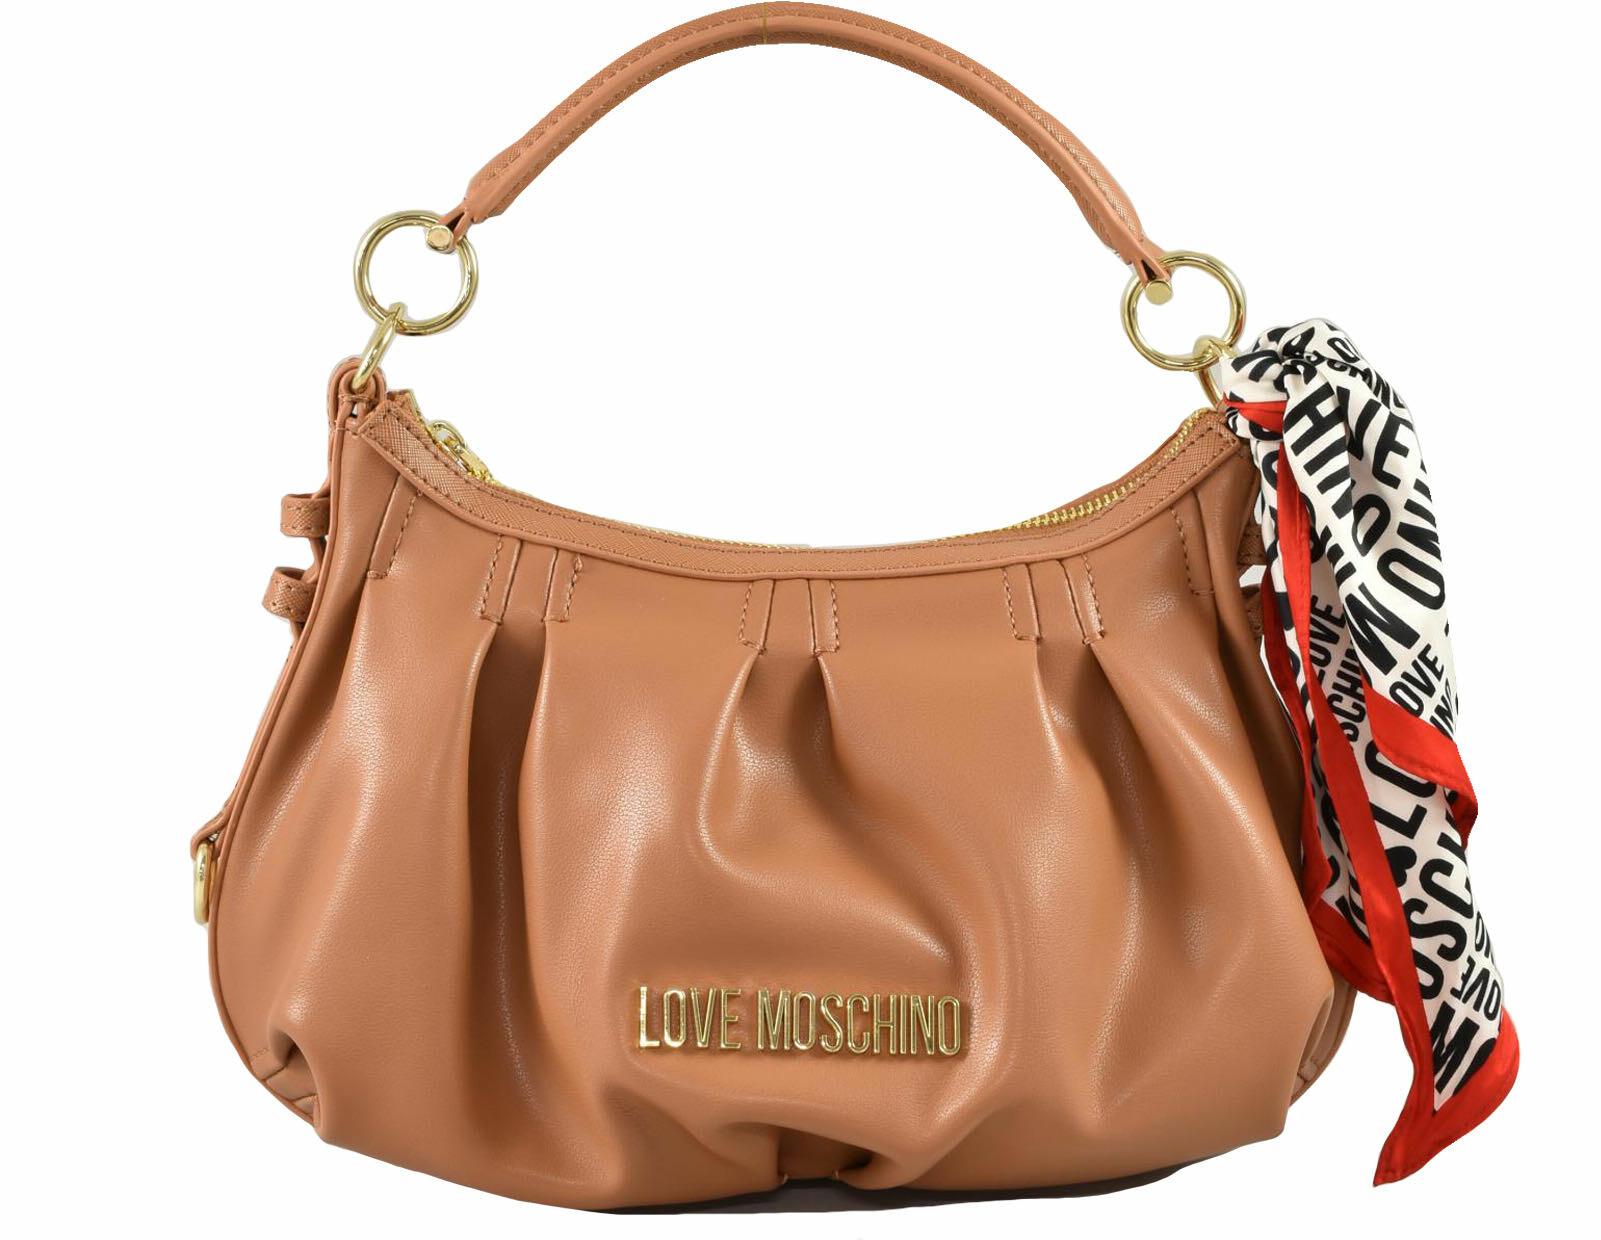 Moschino Leather shoulder bag, Women's Bags